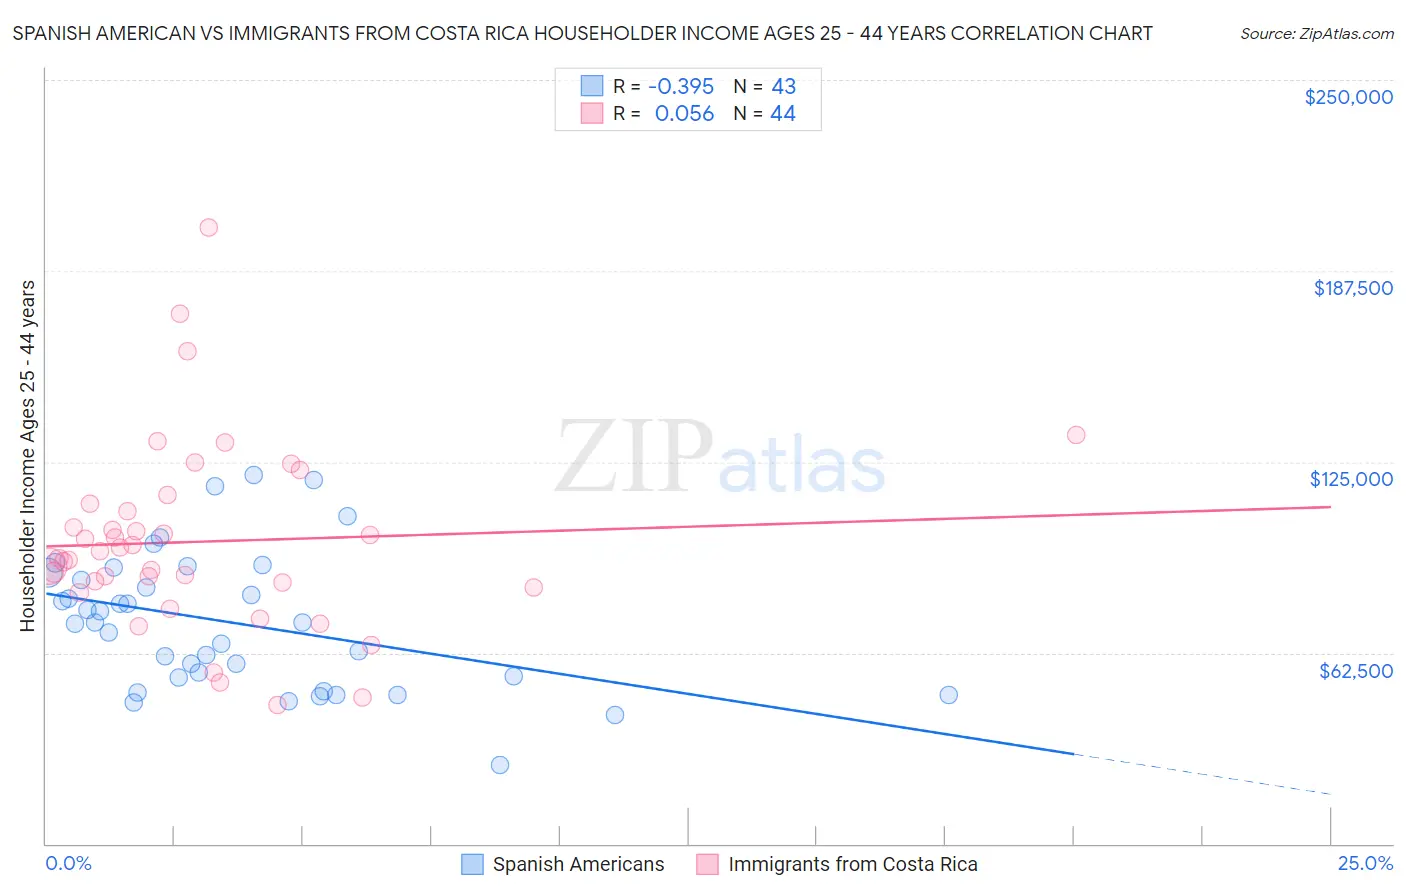 Spanish American vs Immigrants from Costa Rica Householder Income Ages 25 - 44 years